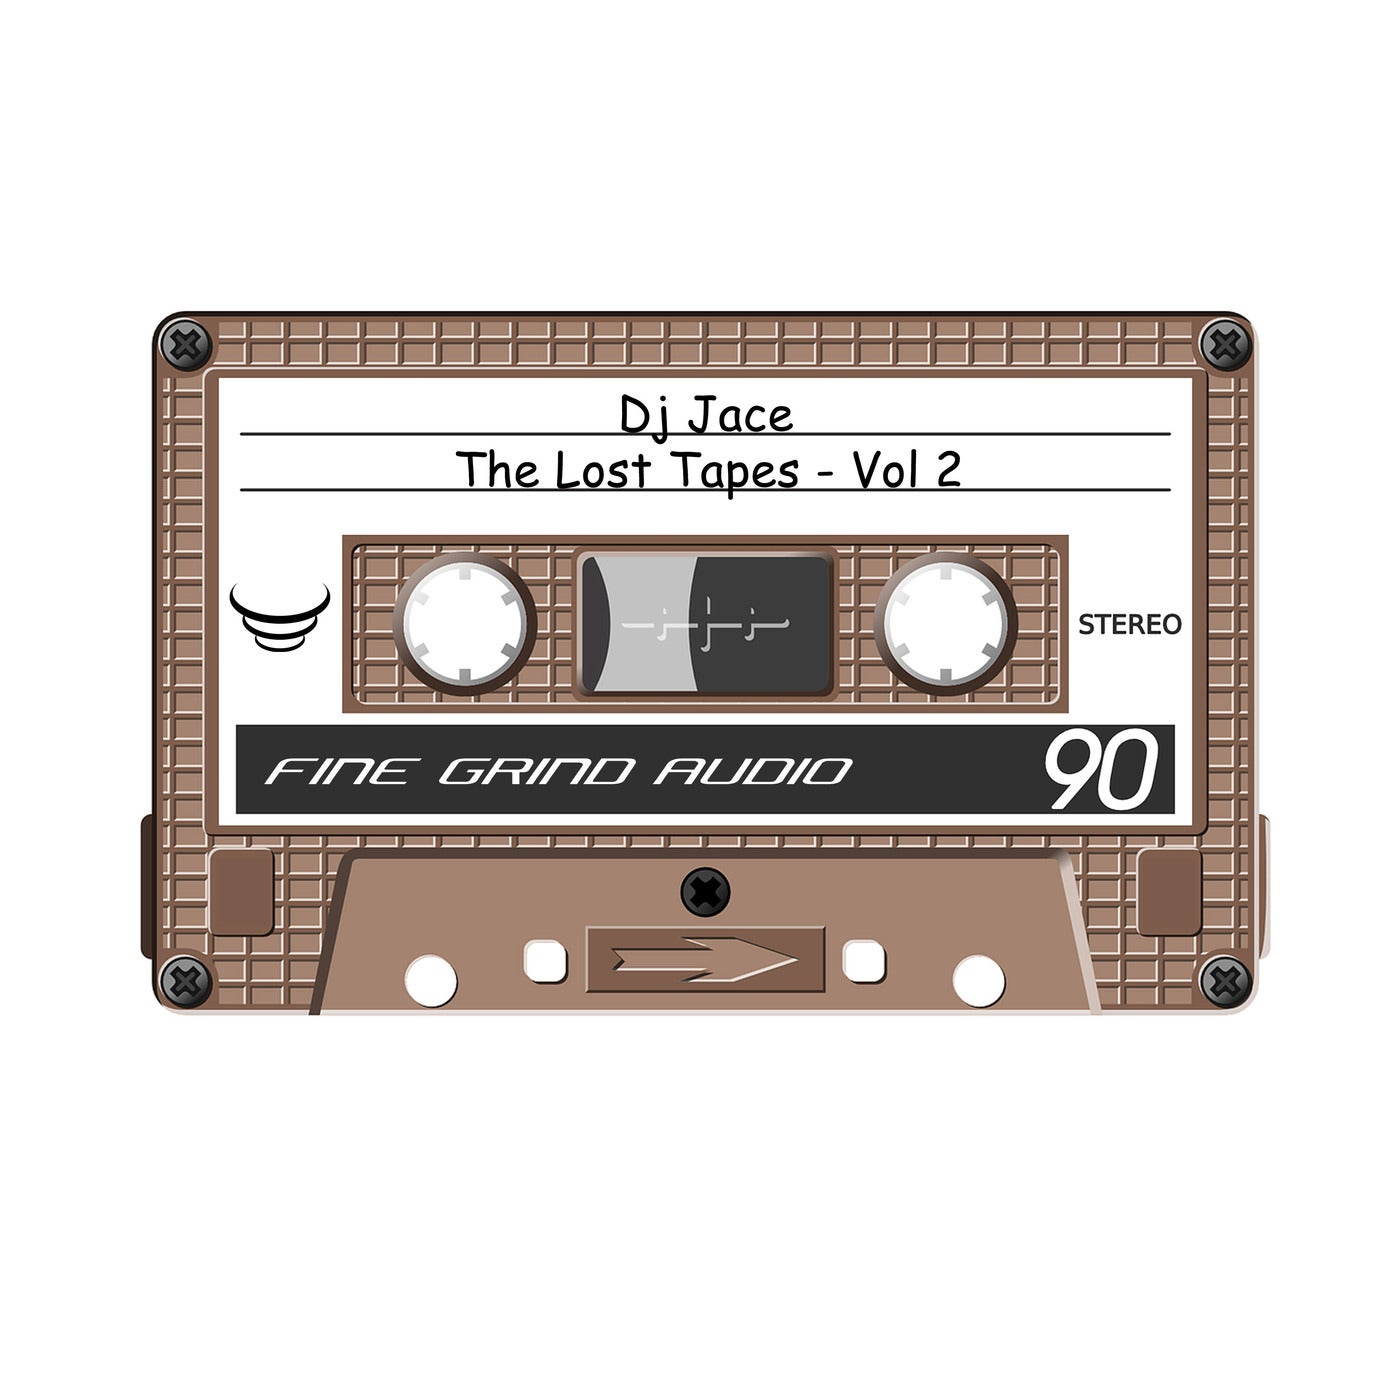 The Lost Tapes Vol II